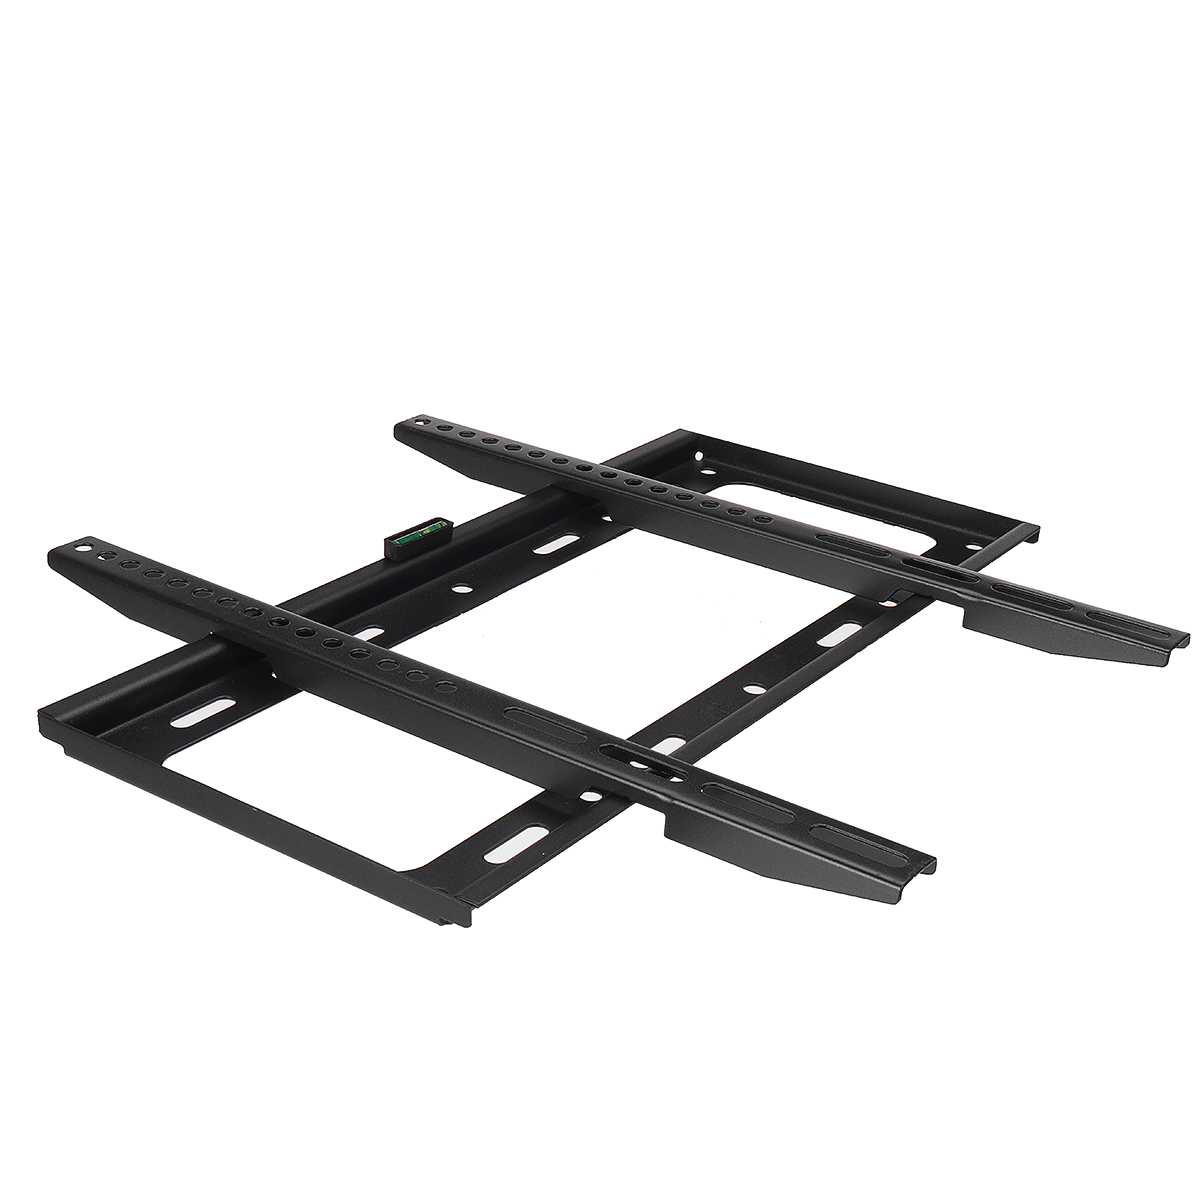 Find TV Wall Mount Monitor Bracket TV Stands with Horizontal Post Installation Leveling for 26 Inch to 60 Inch TVs for Sale on Gipsybee.com with cryptocurrencies